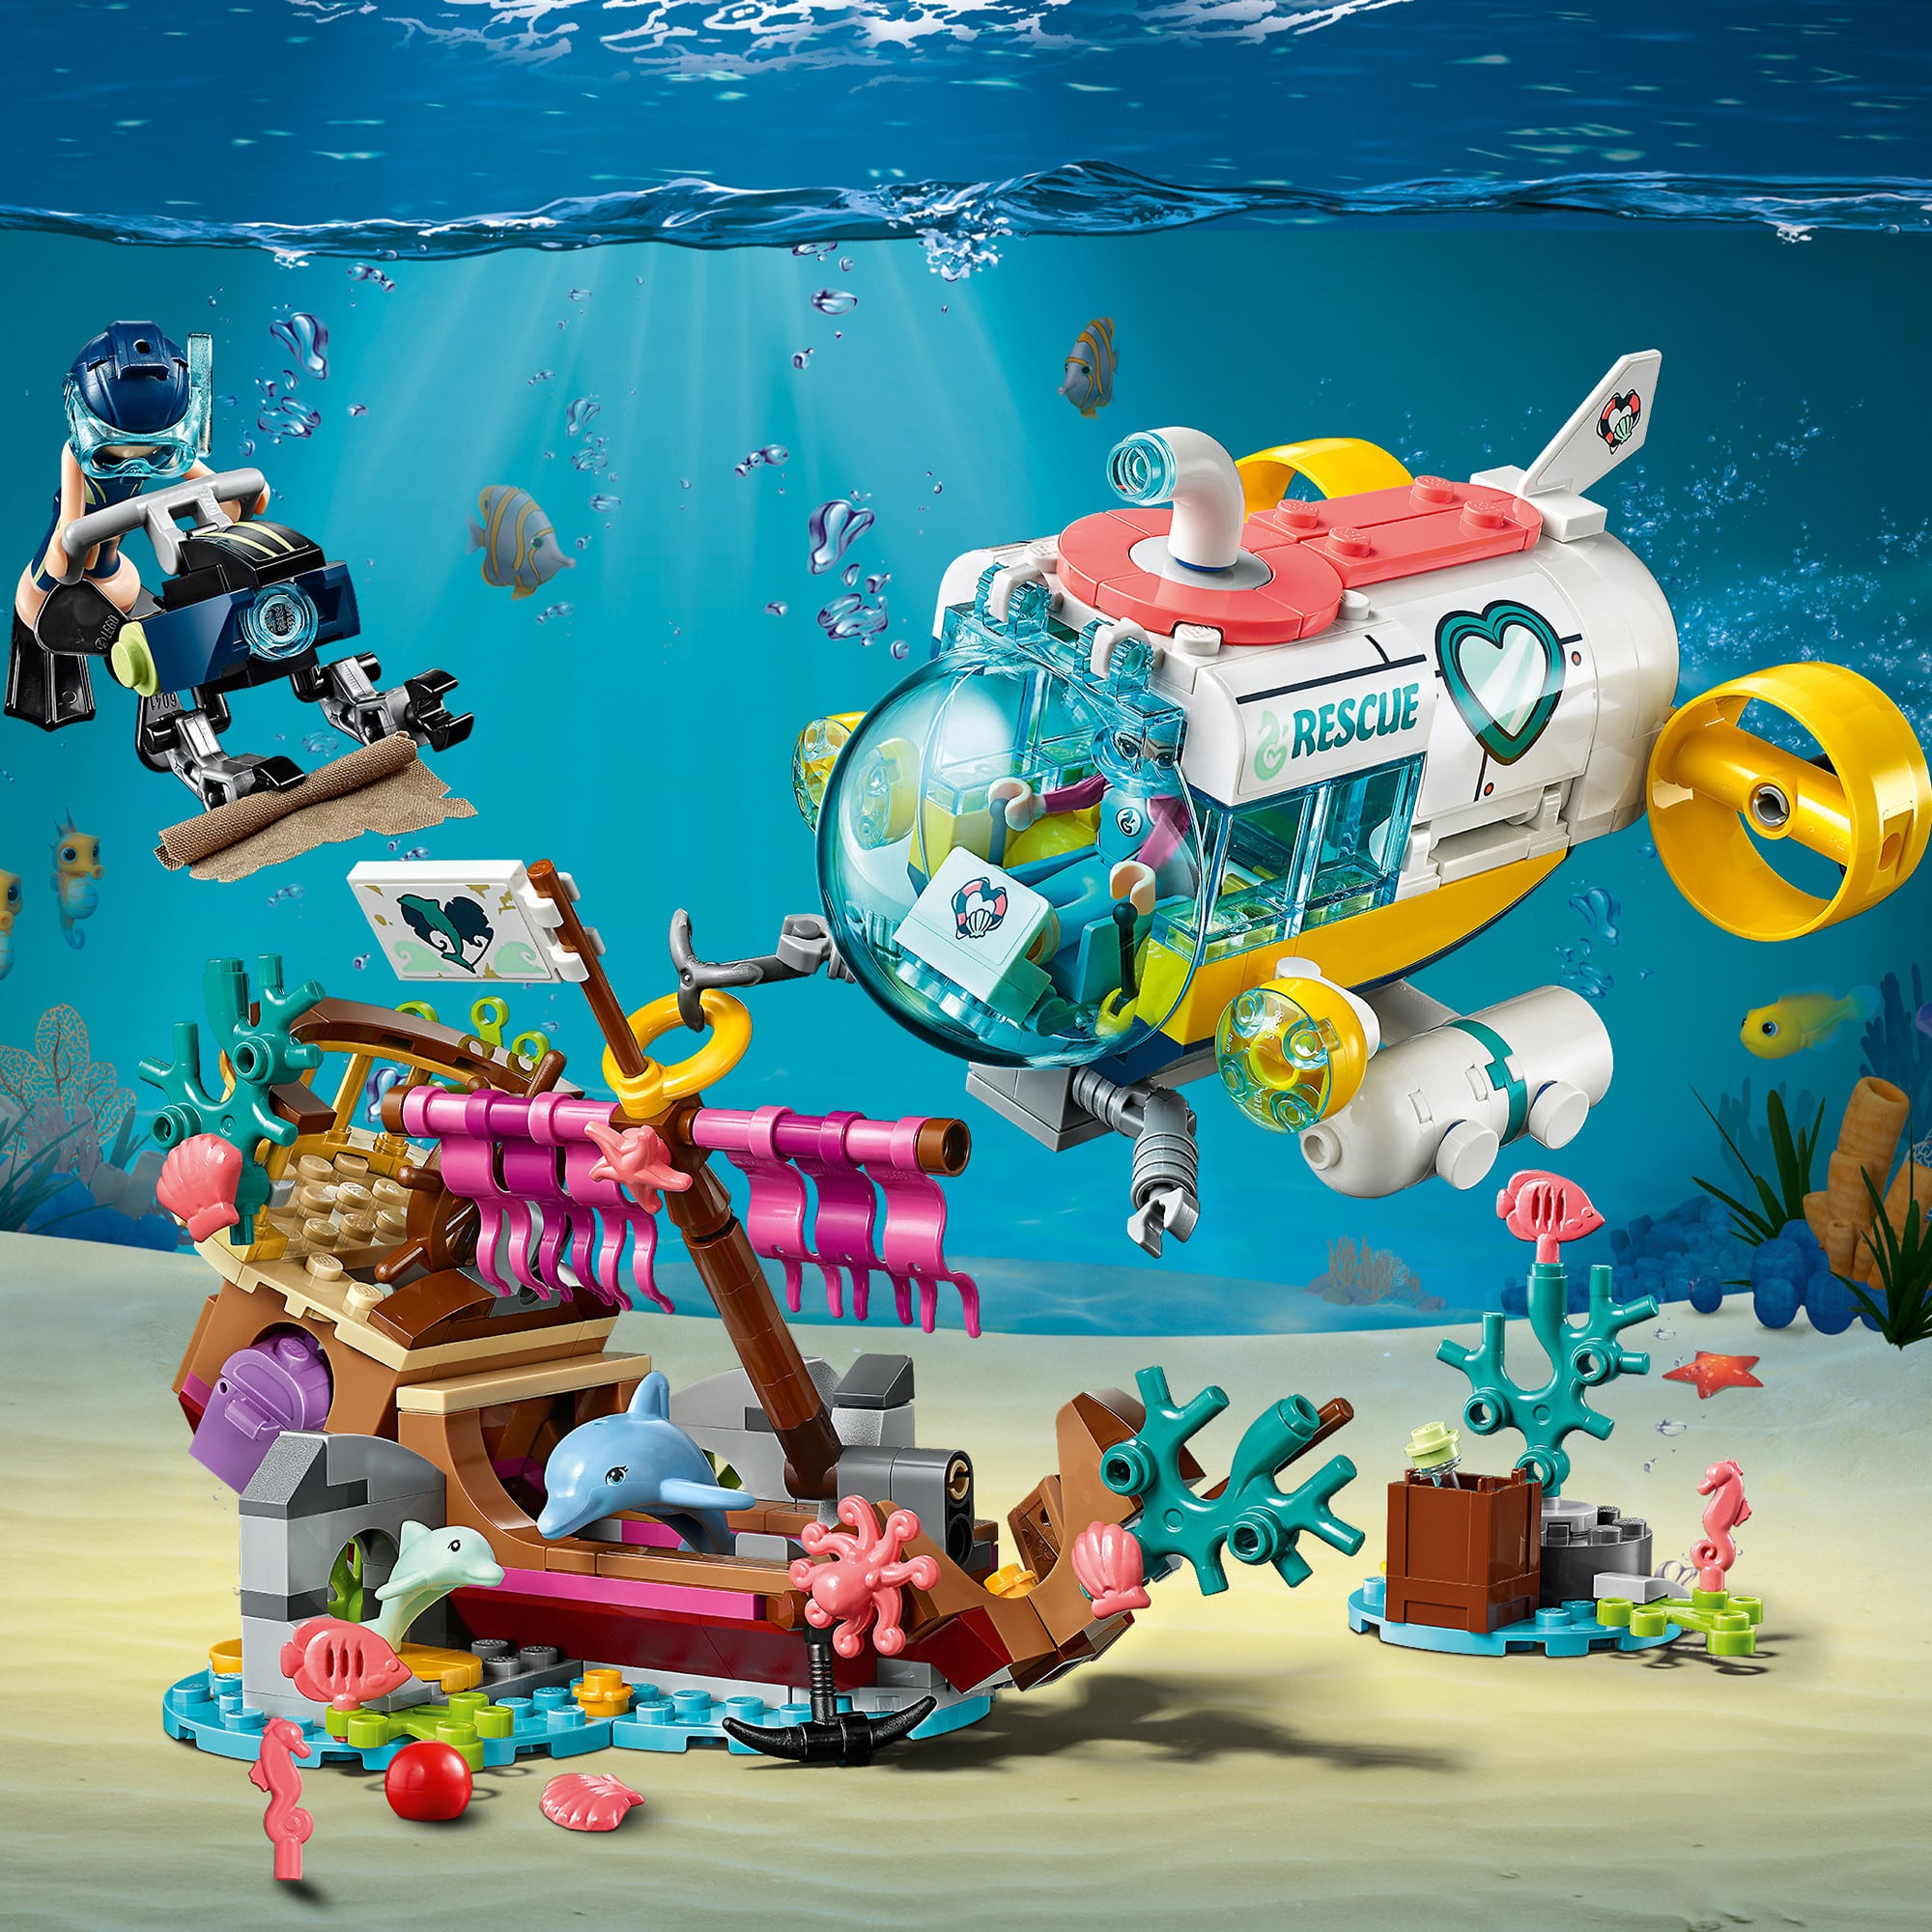 LEGO Friends 41378 - Dolphins Rescue Mission